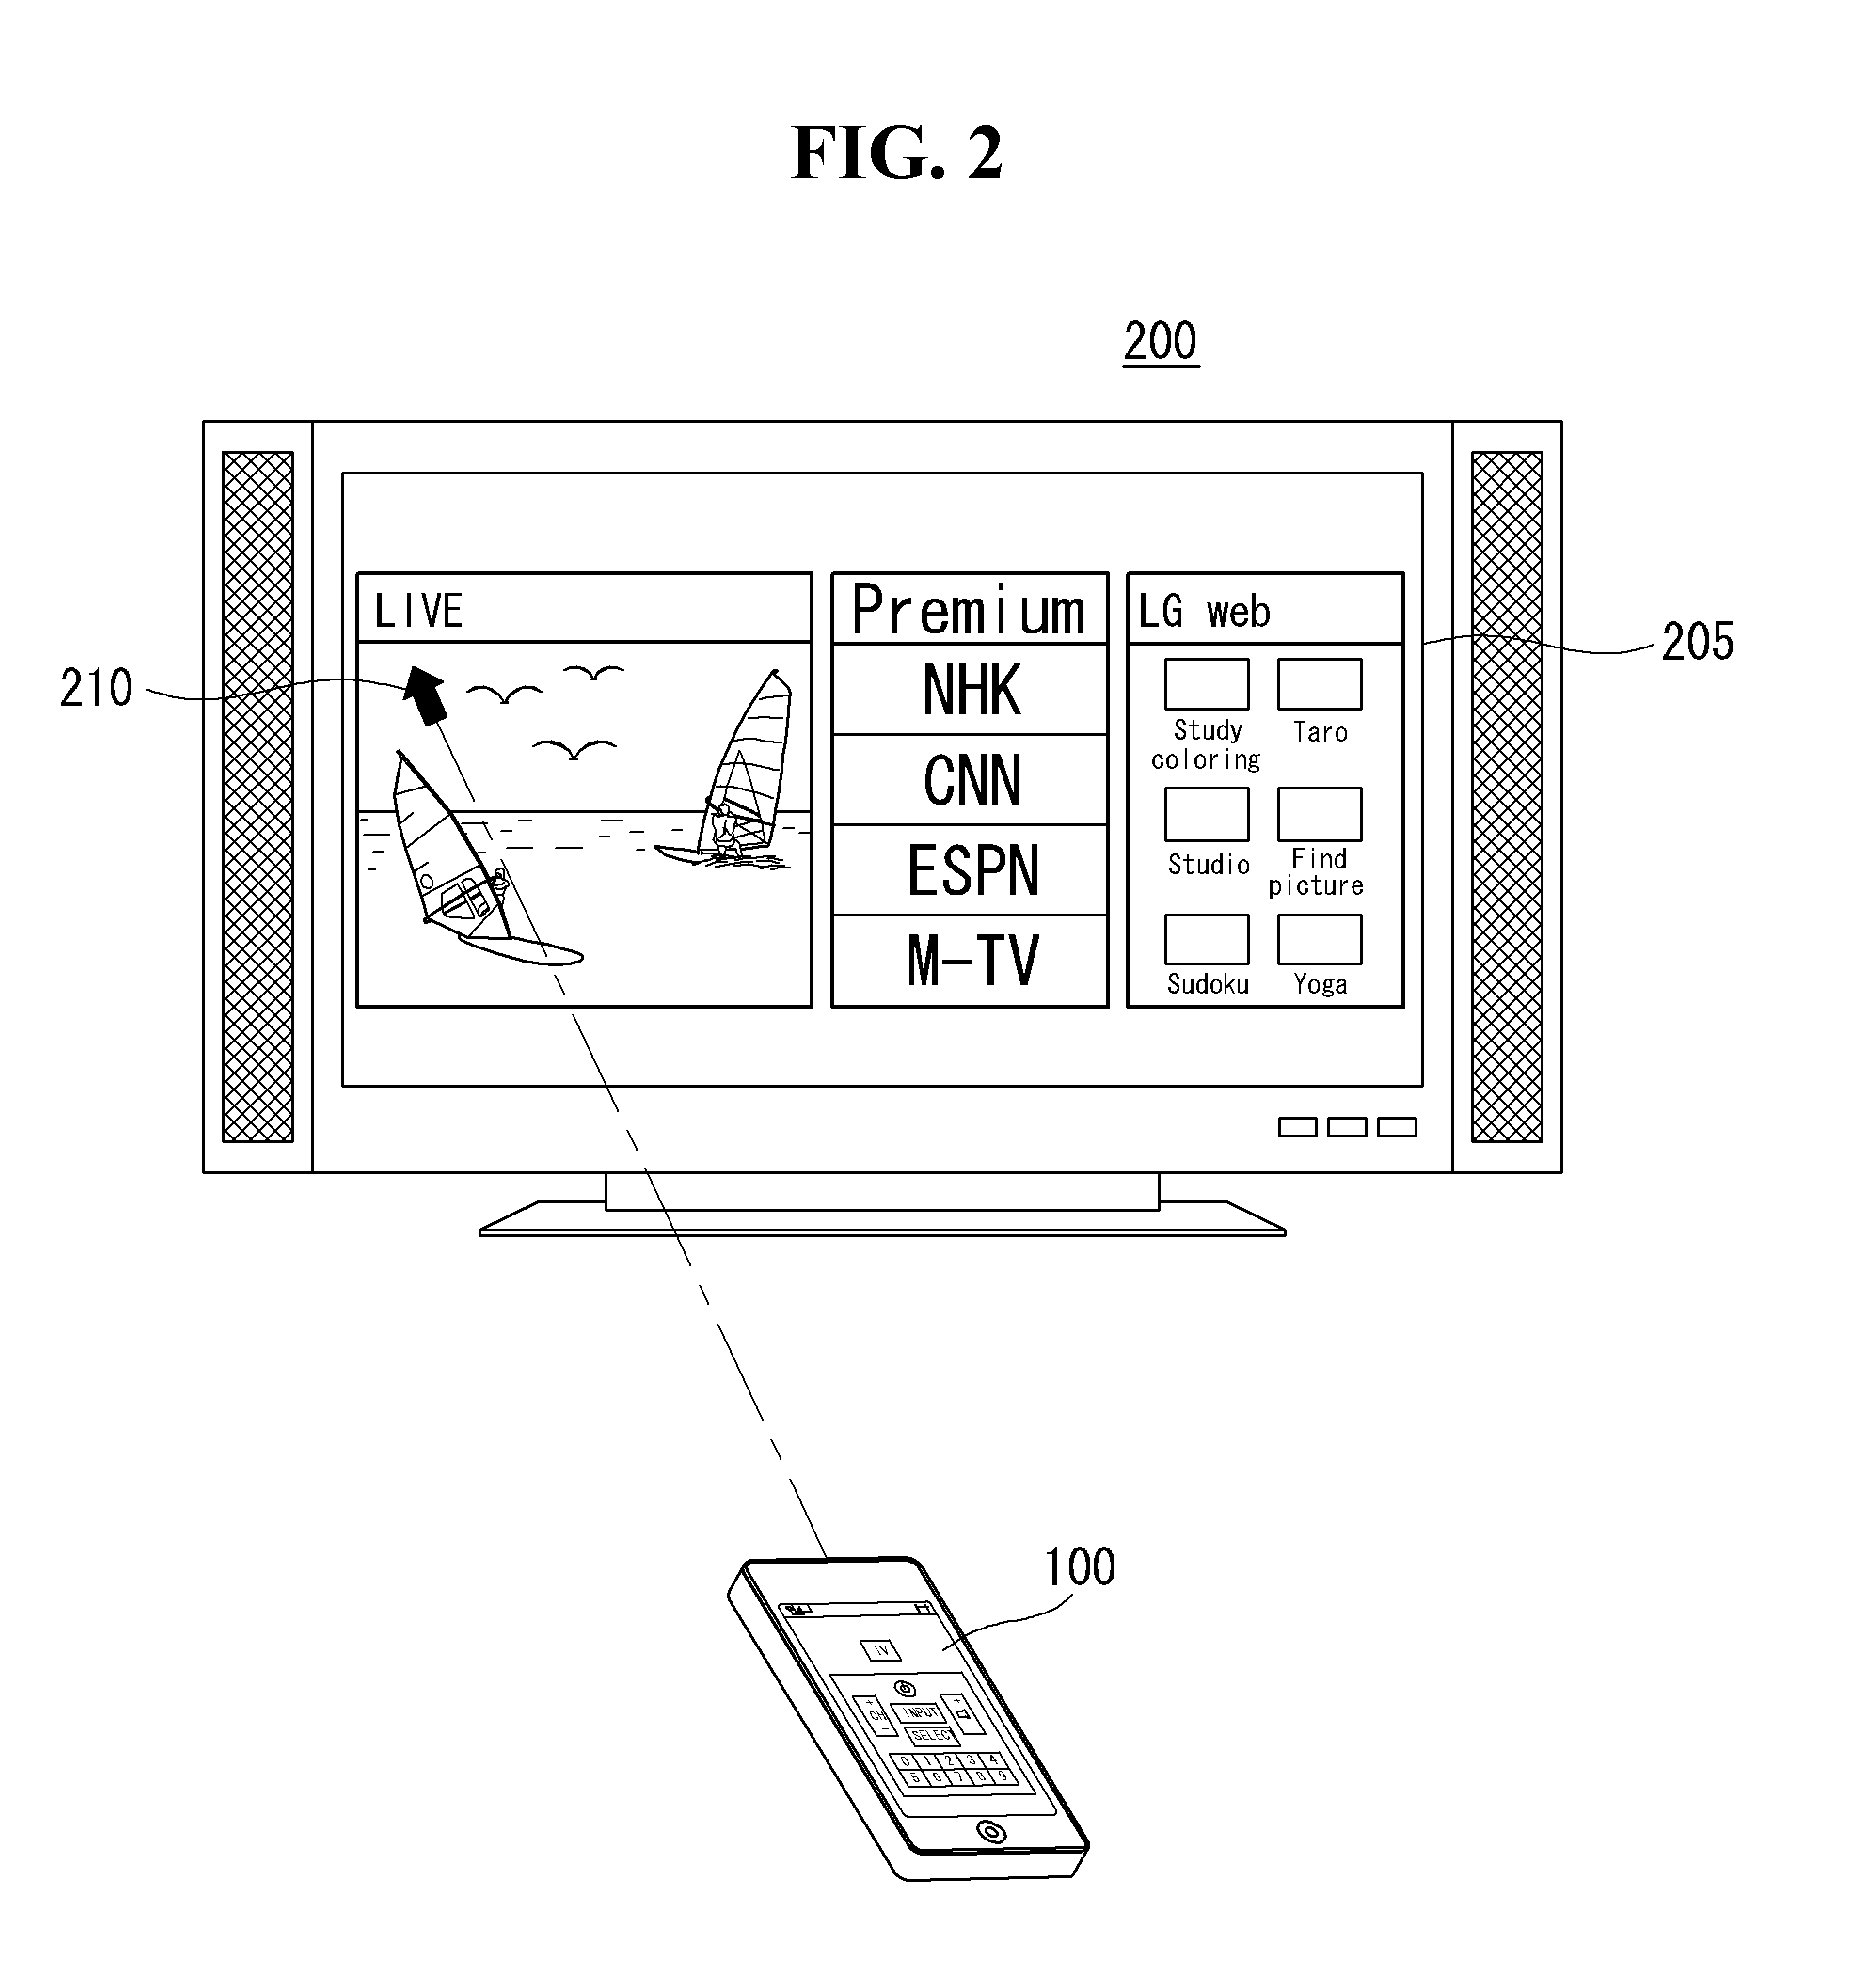 Mobile terminal performing remote control function for display device